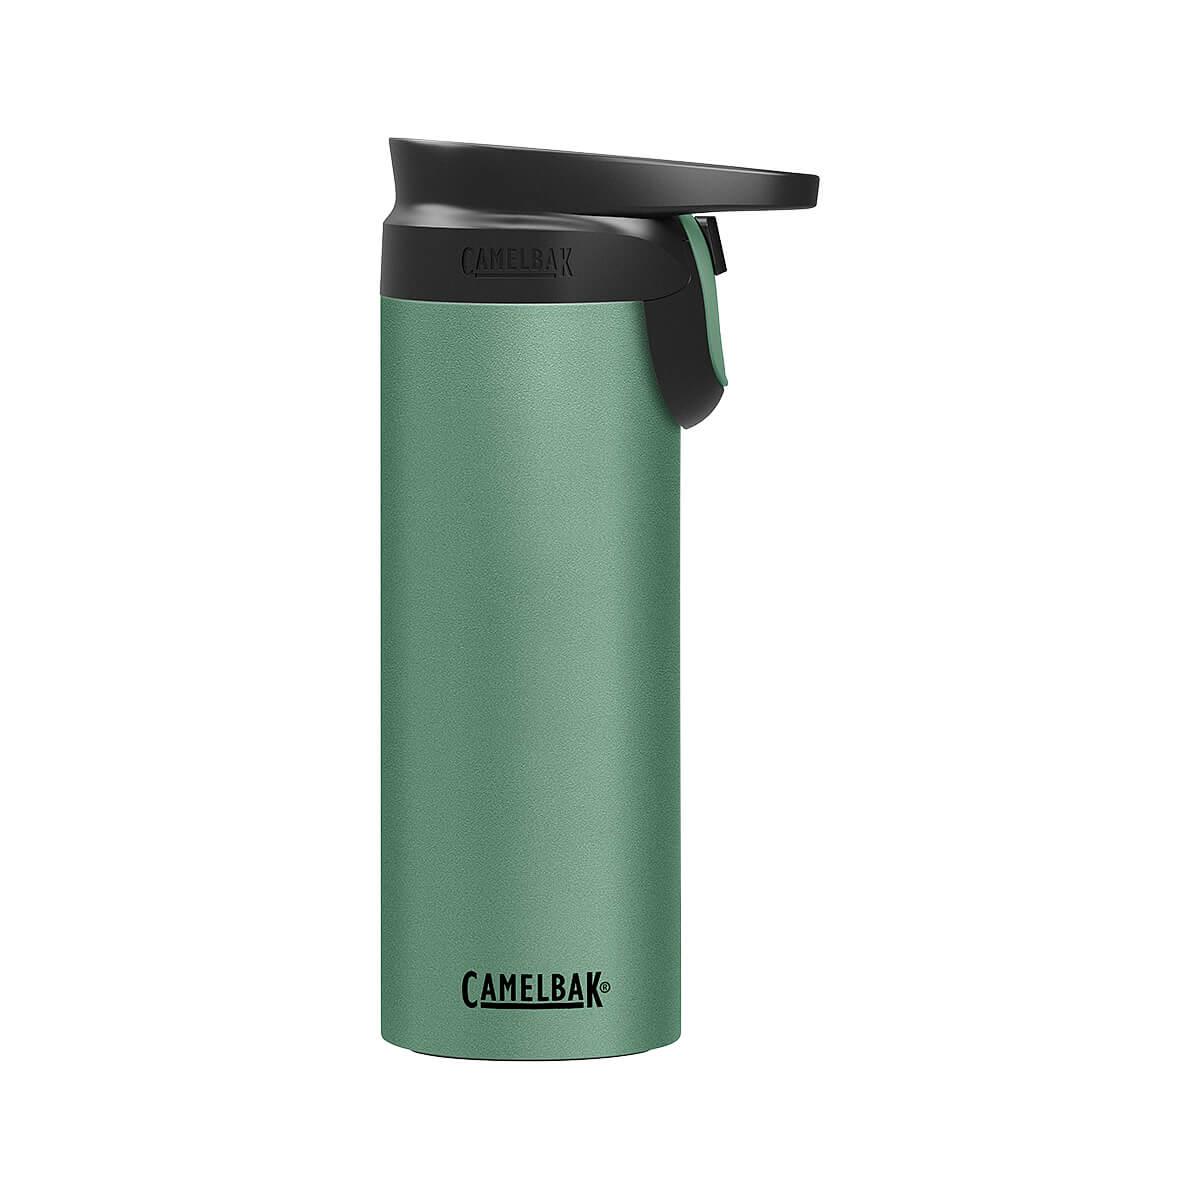  Forge Flow Insulated Stainless Steel Travel Mug - 16 Ounce